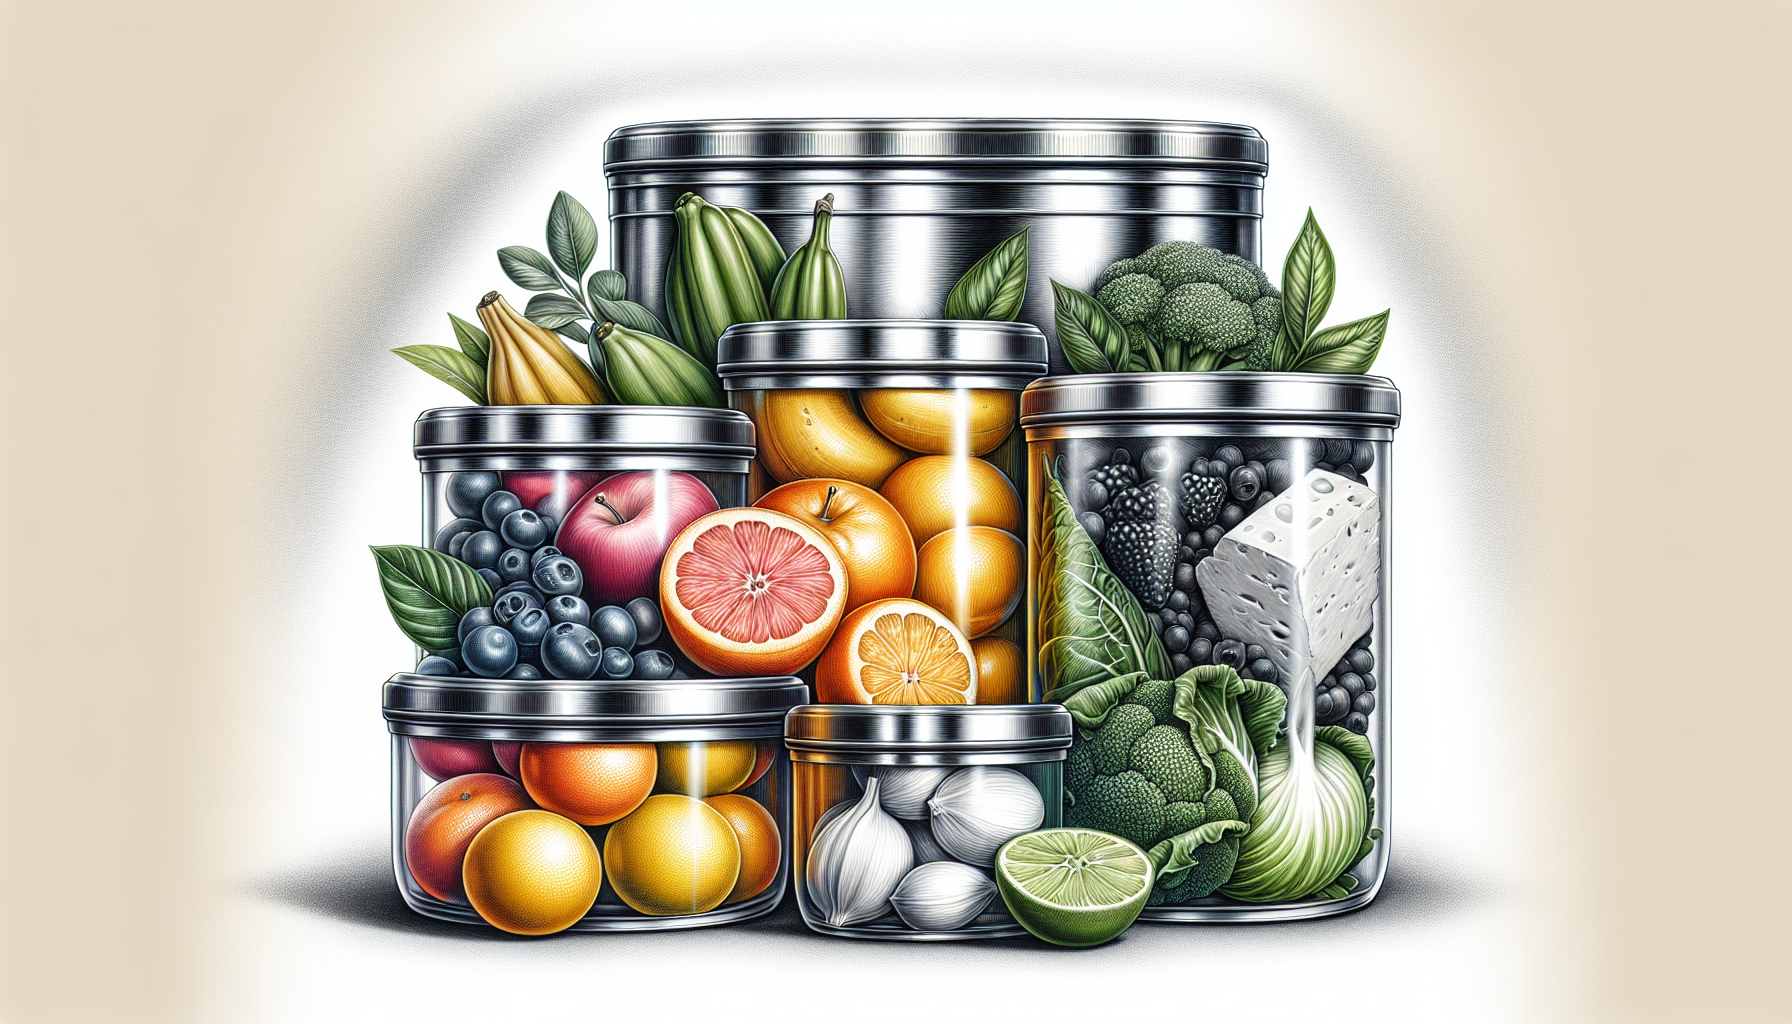 Storing acidic and alkaline foods in stainless steel containers